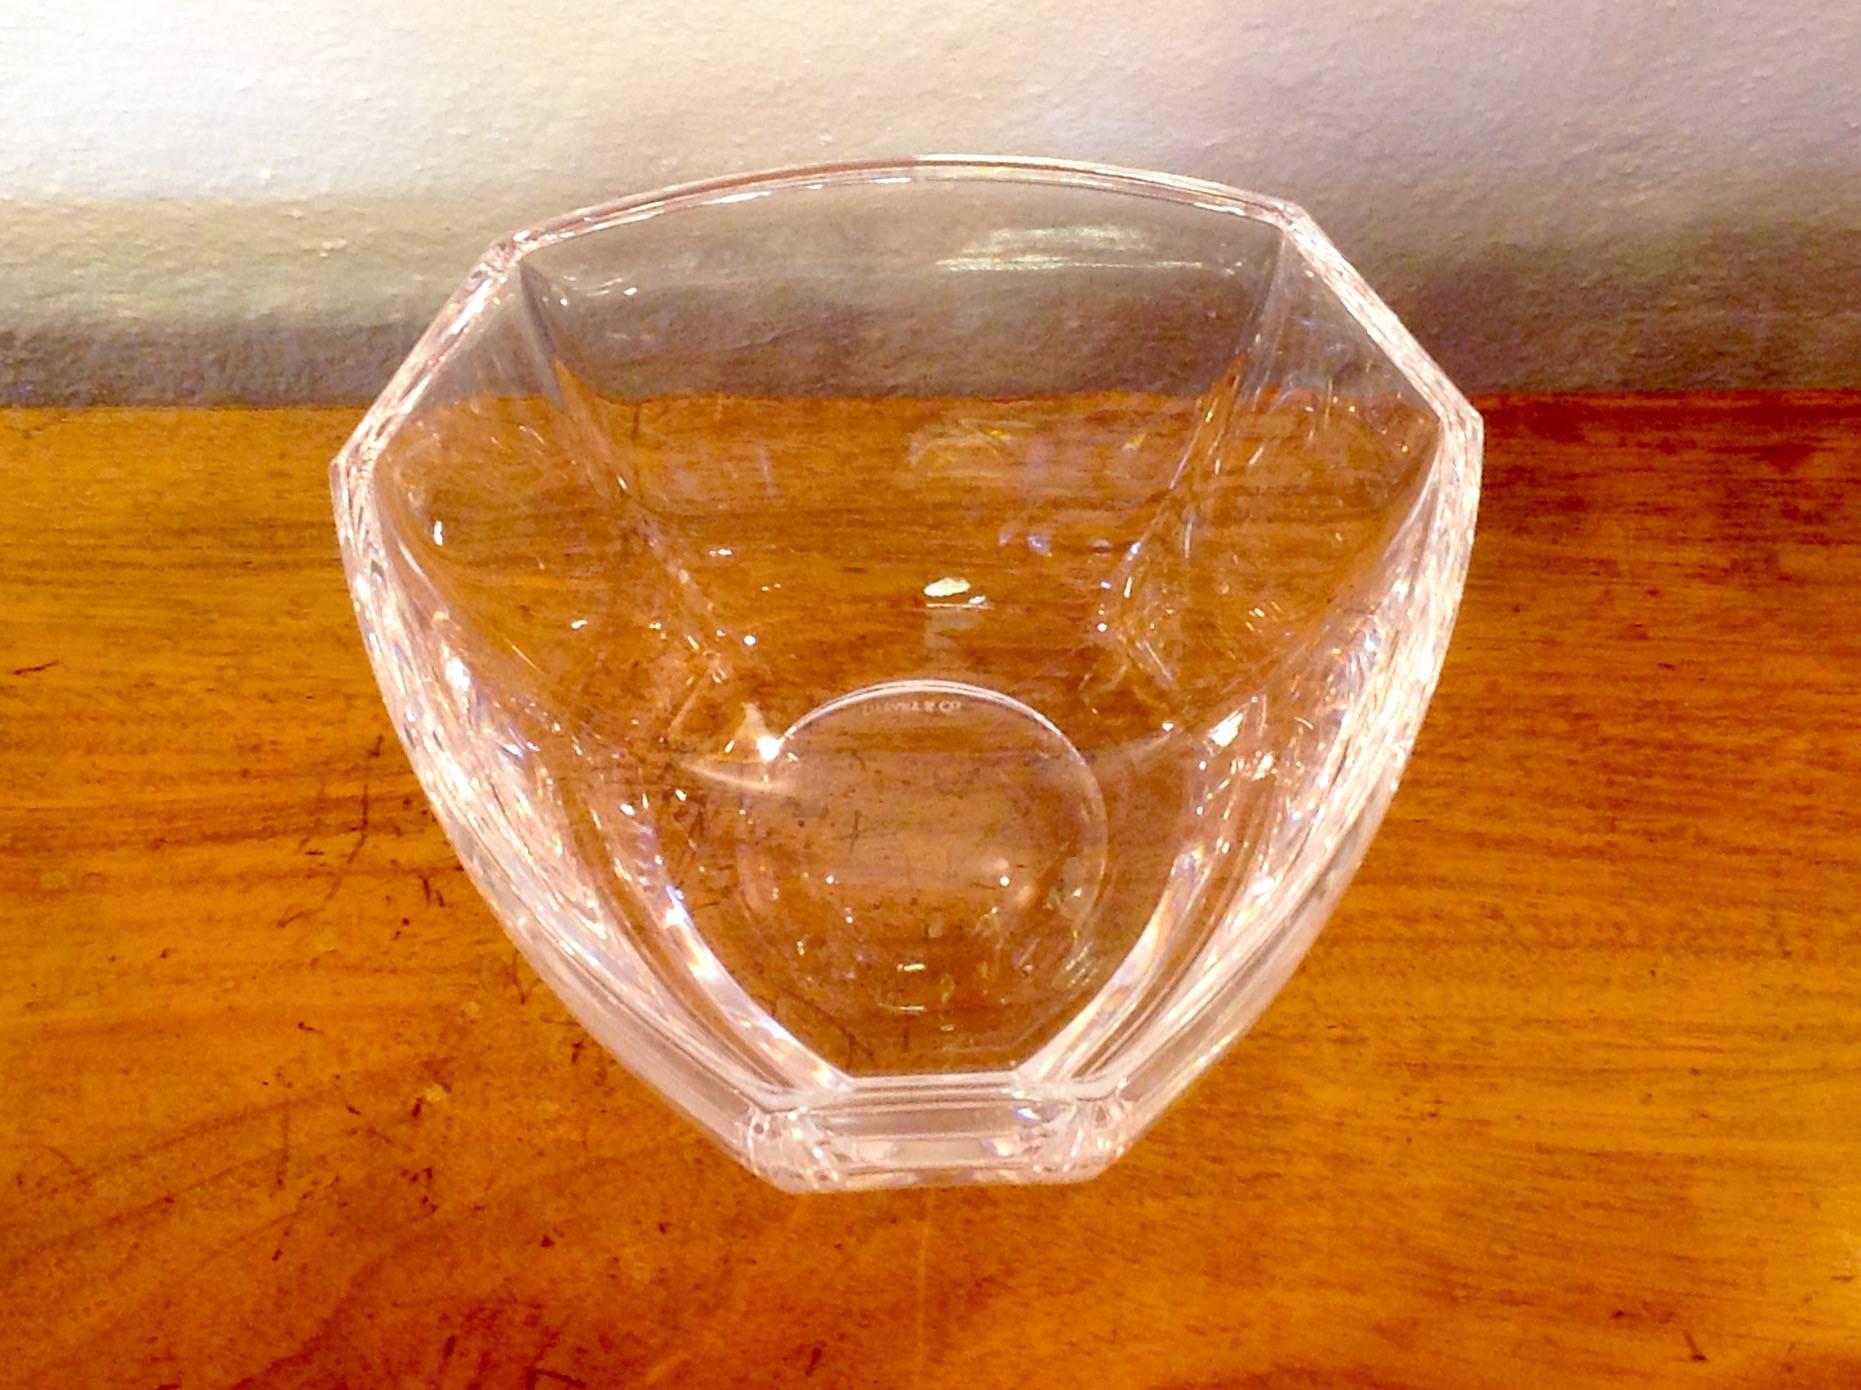 Vintage Tiffany and Co. crystal bowl, made in Germany, six sided hexagonal bell design. Heavy glass or crystal. Tiffany and Co. signature on bottom.